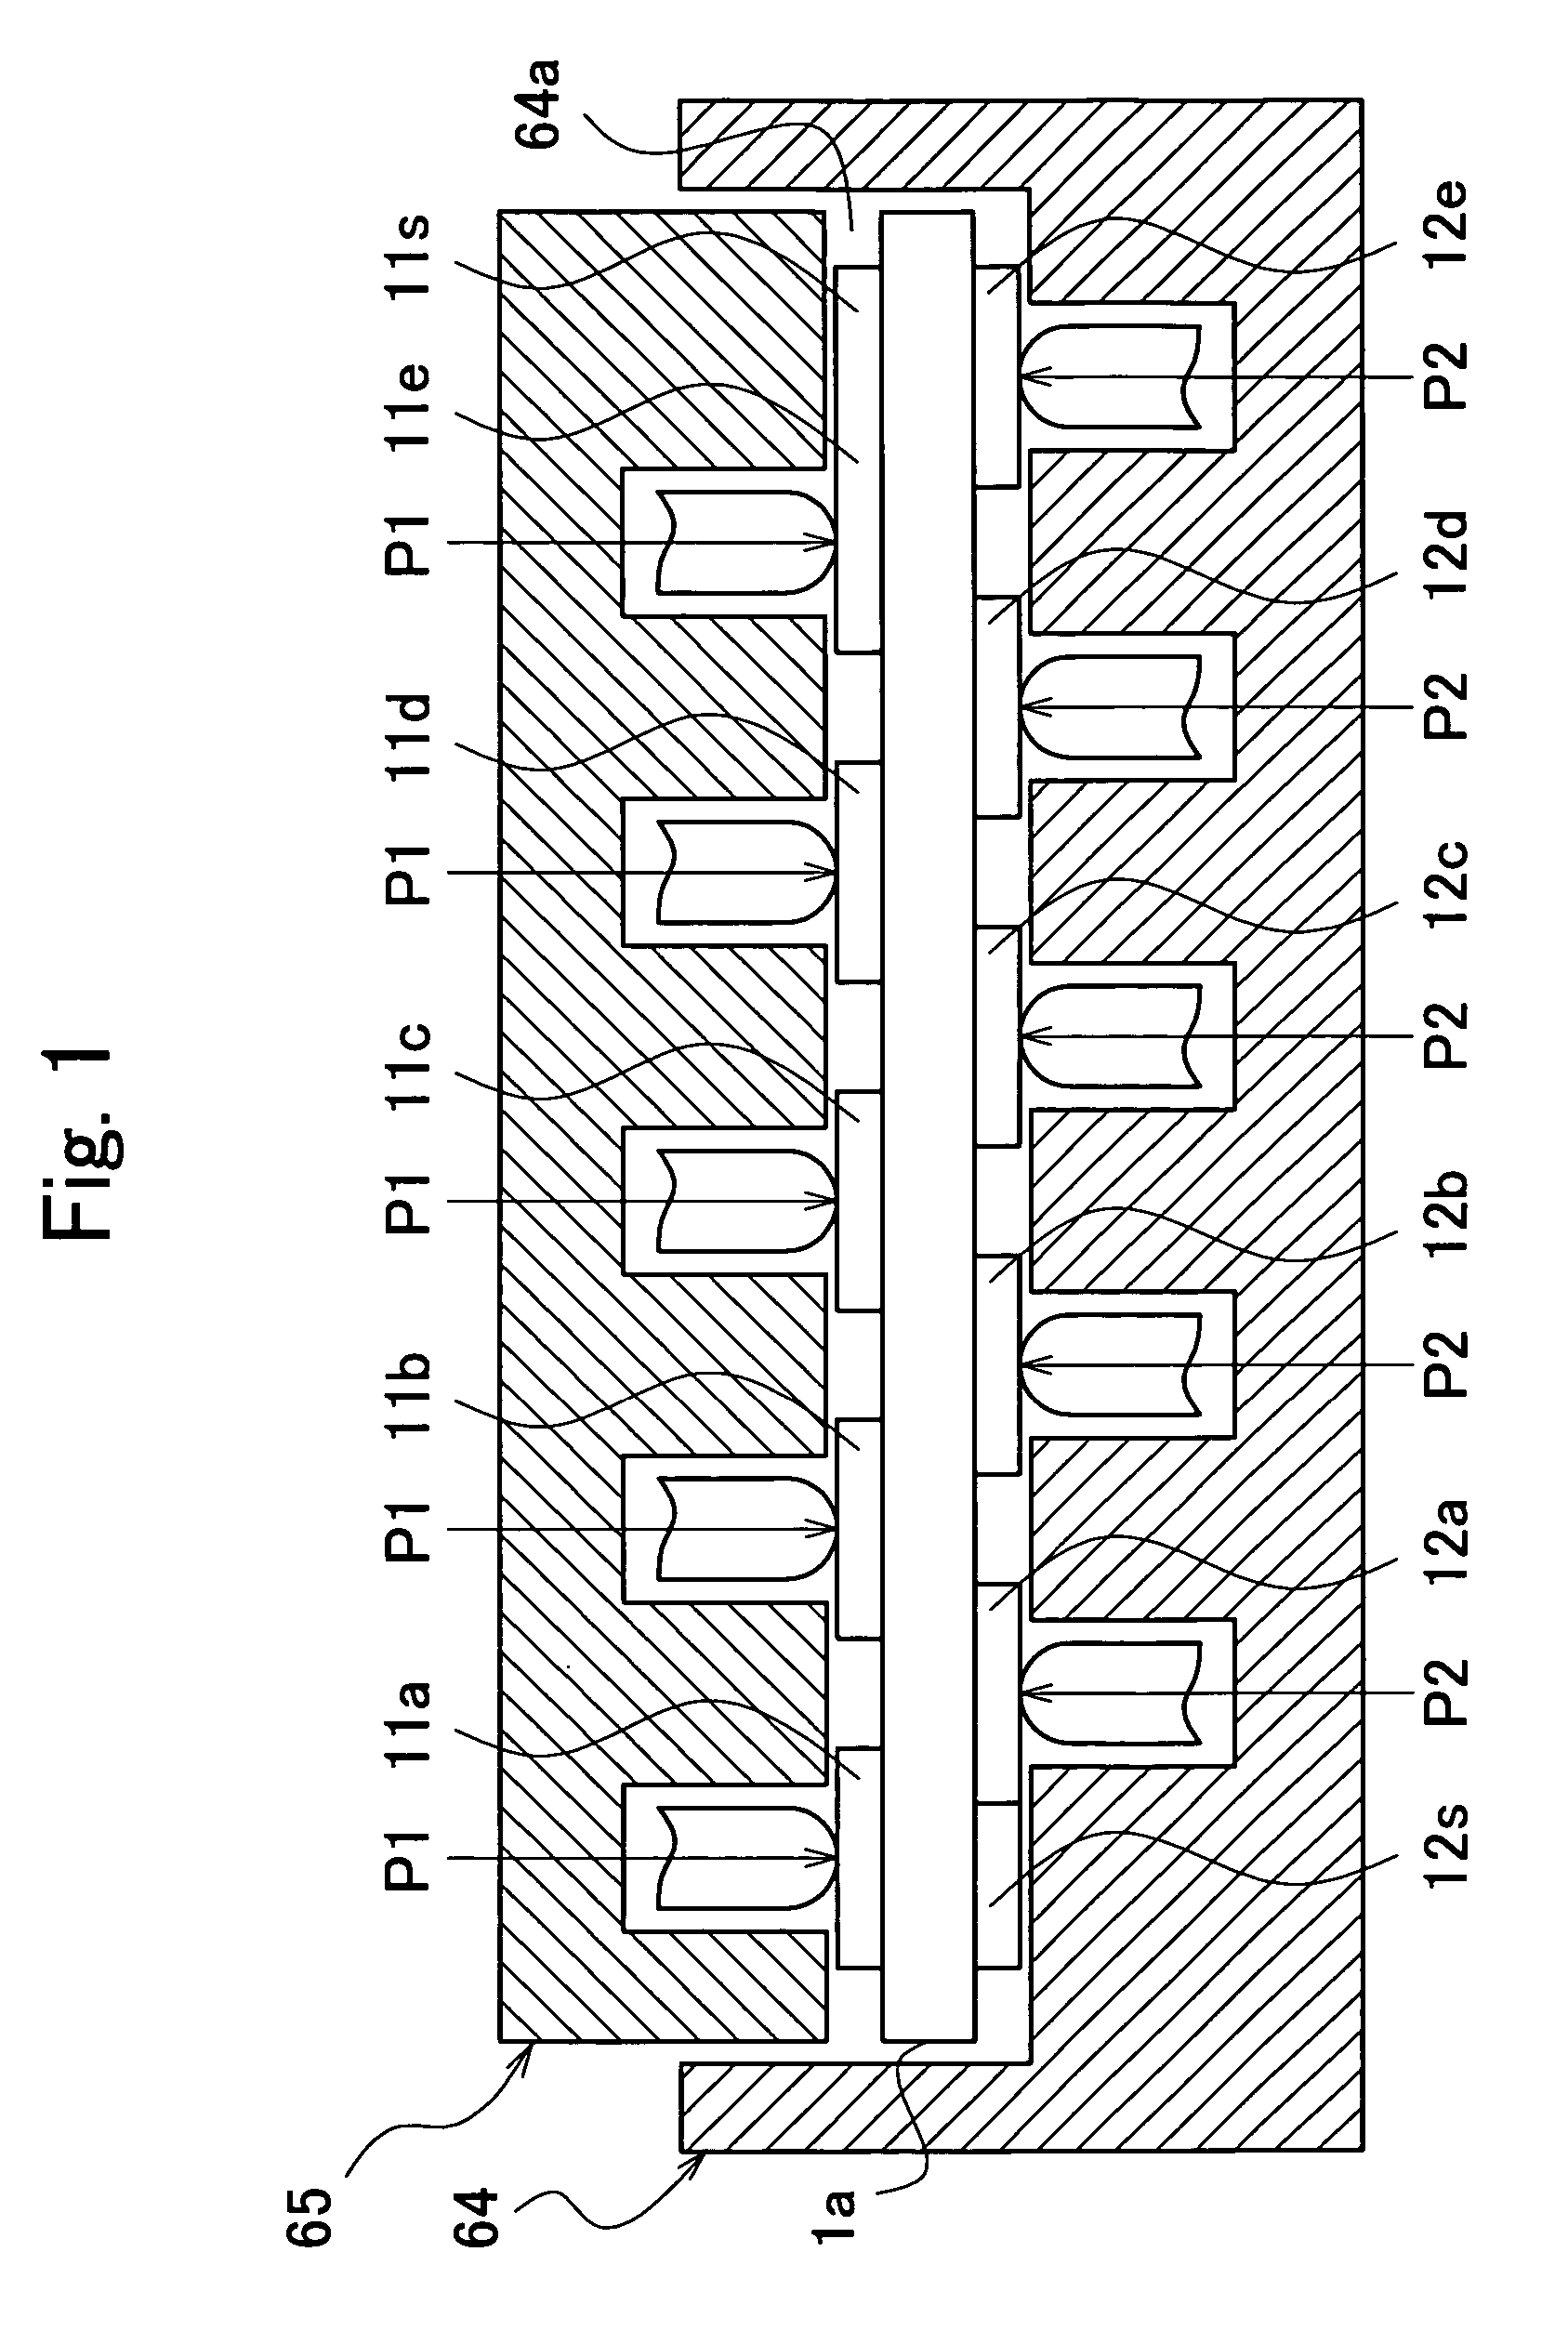 Double-sided flexible printed circuits